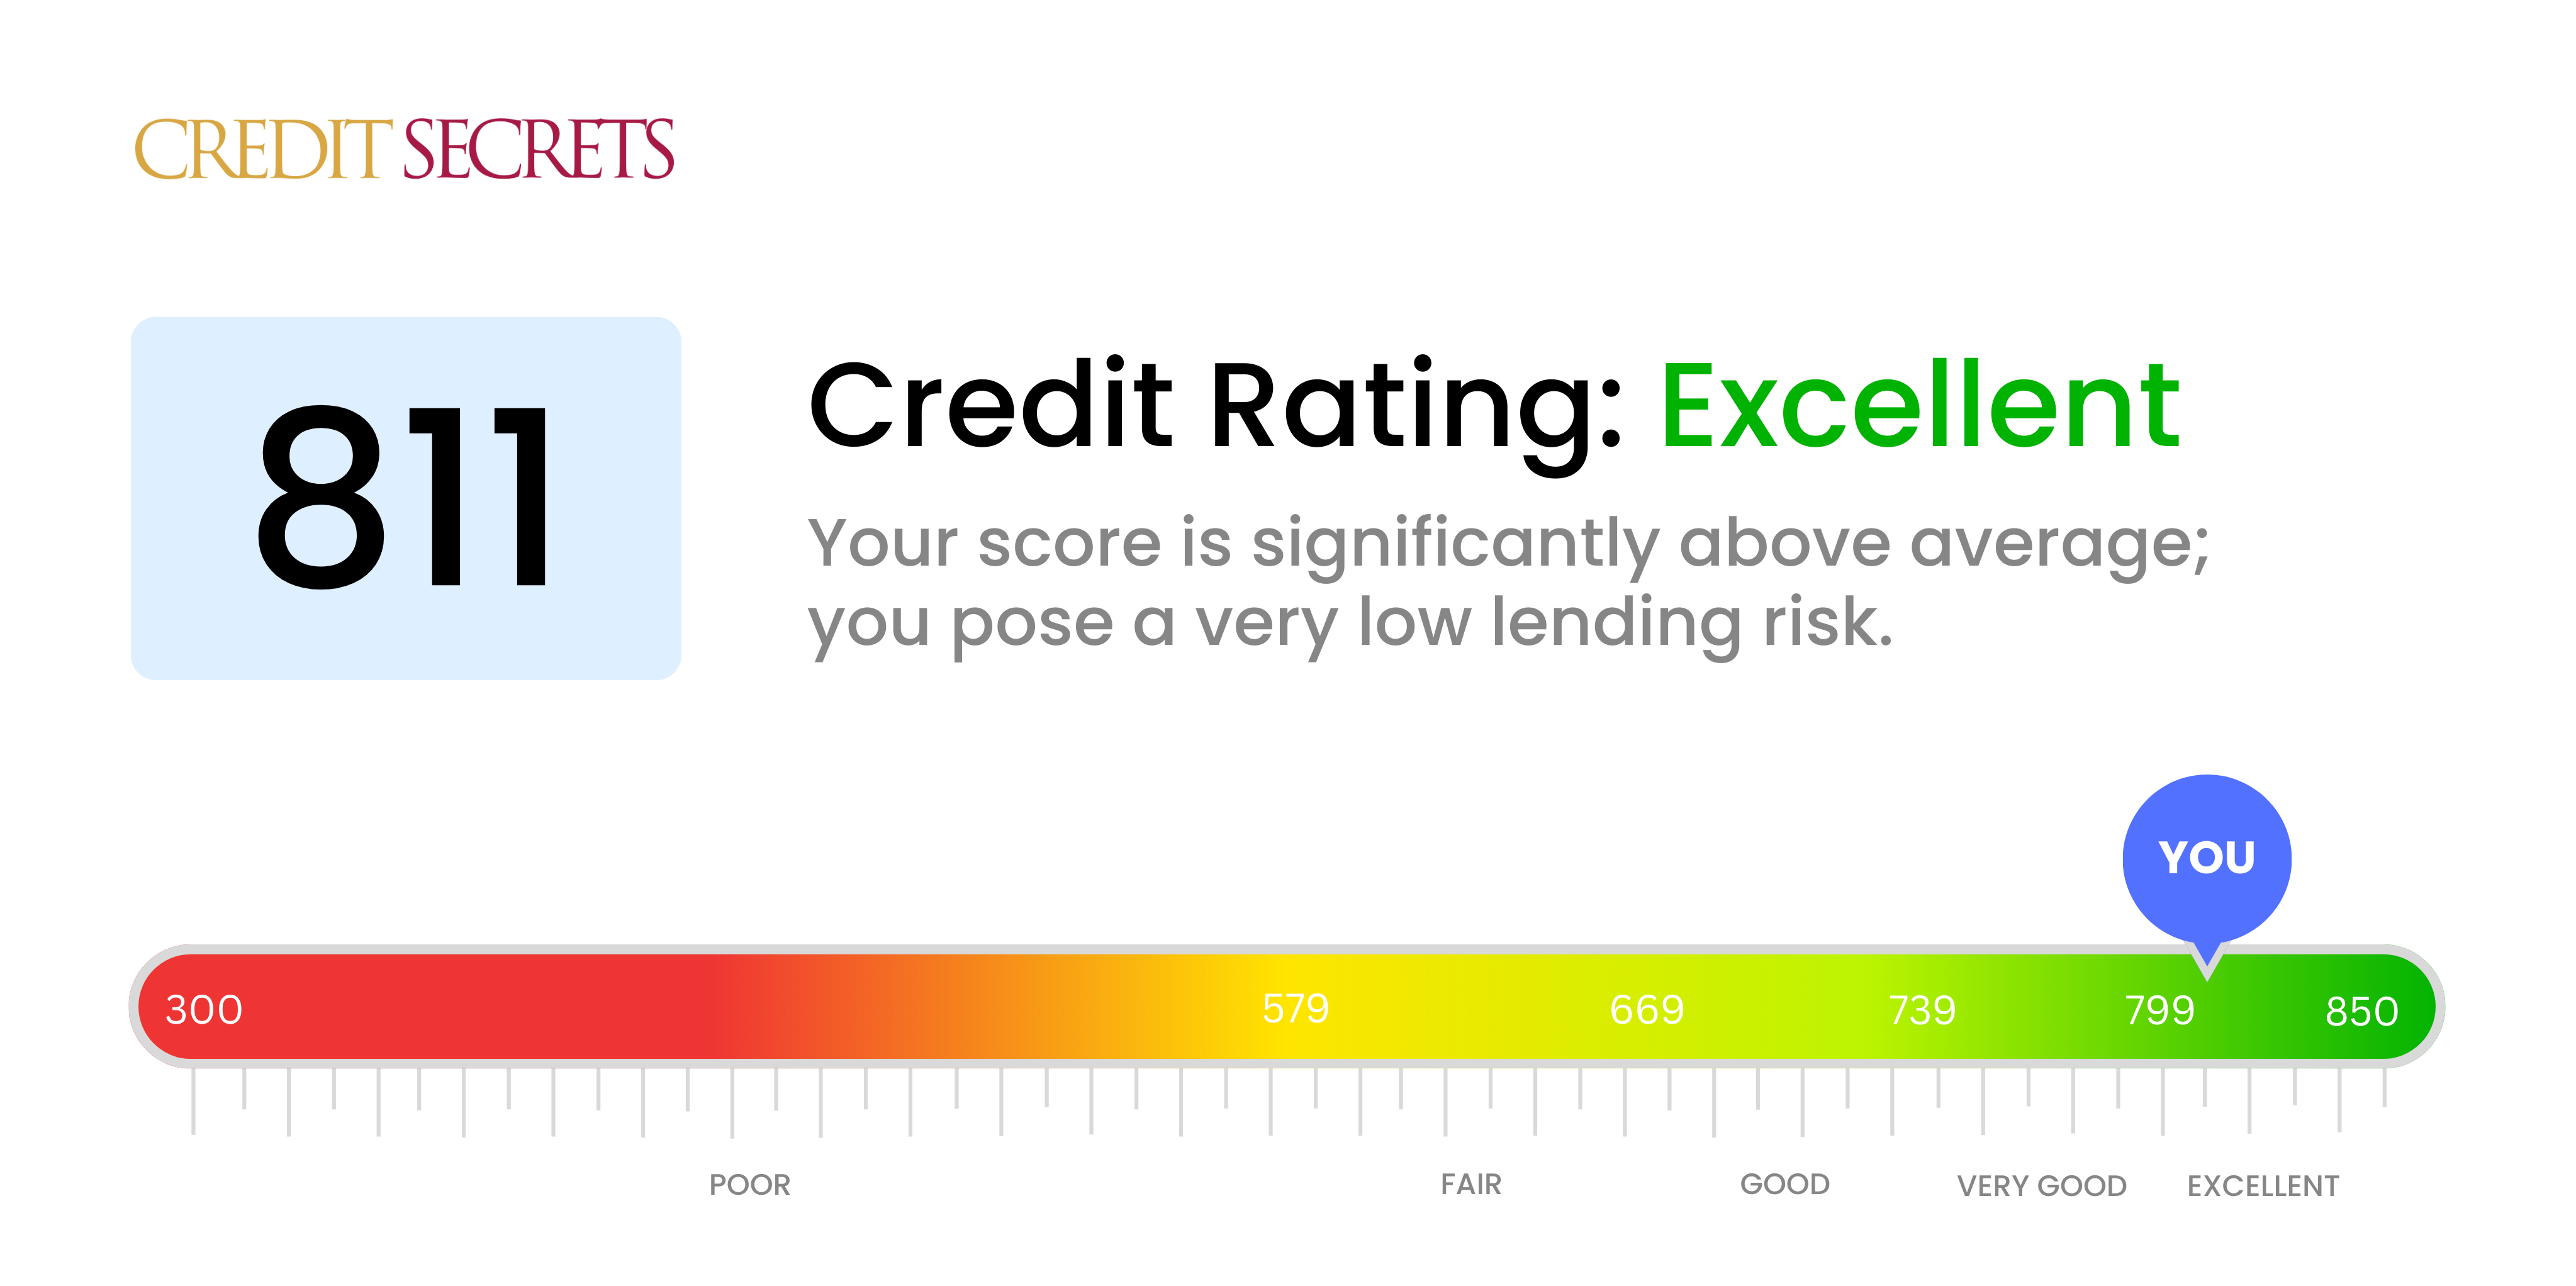 Is 811 a good credit score?